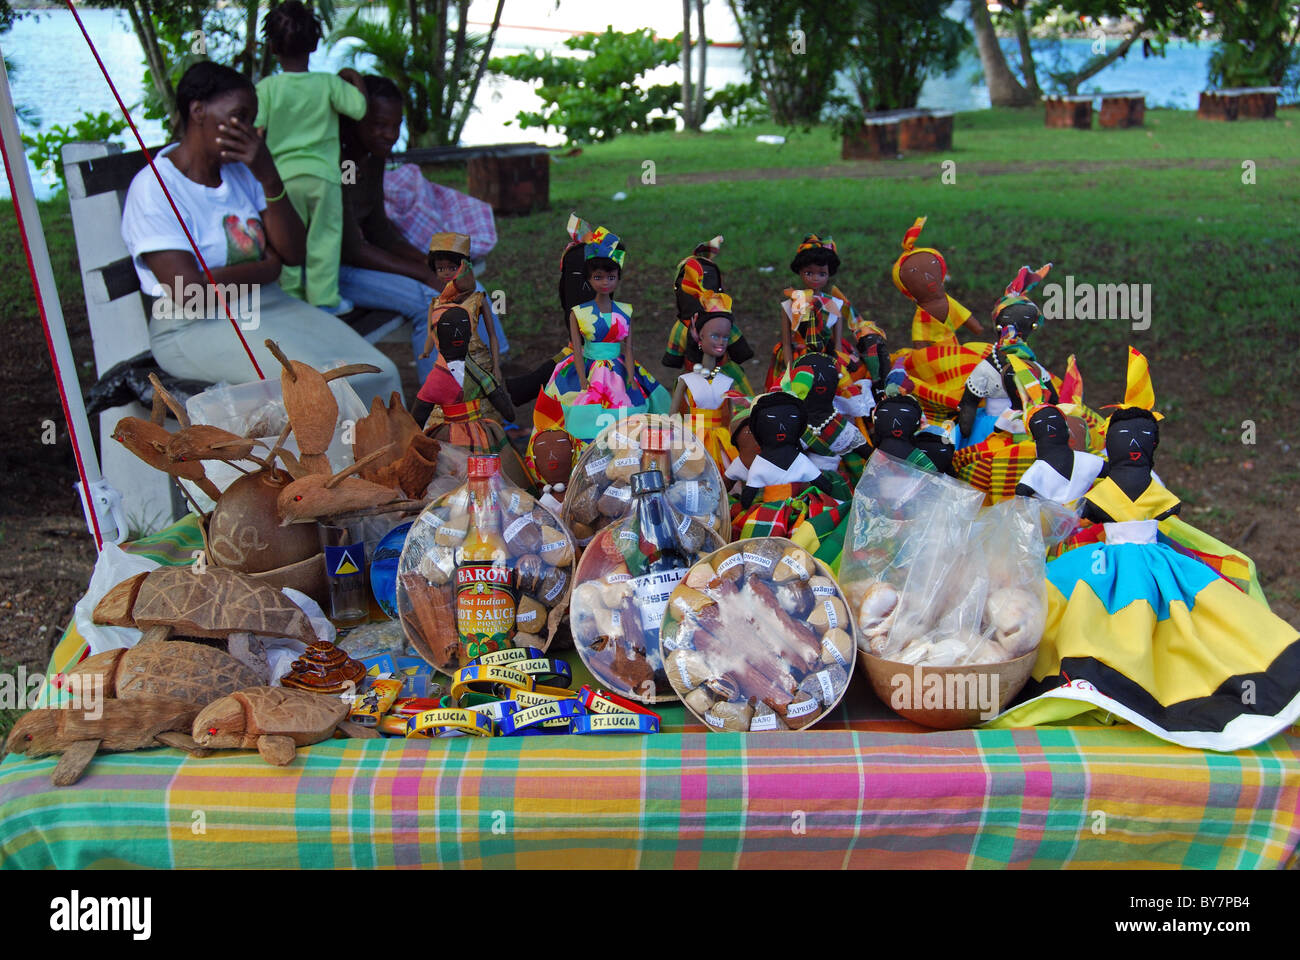 Souvenirs on street stall, Castries, St. Lucia, Caribbean. Stock Photo